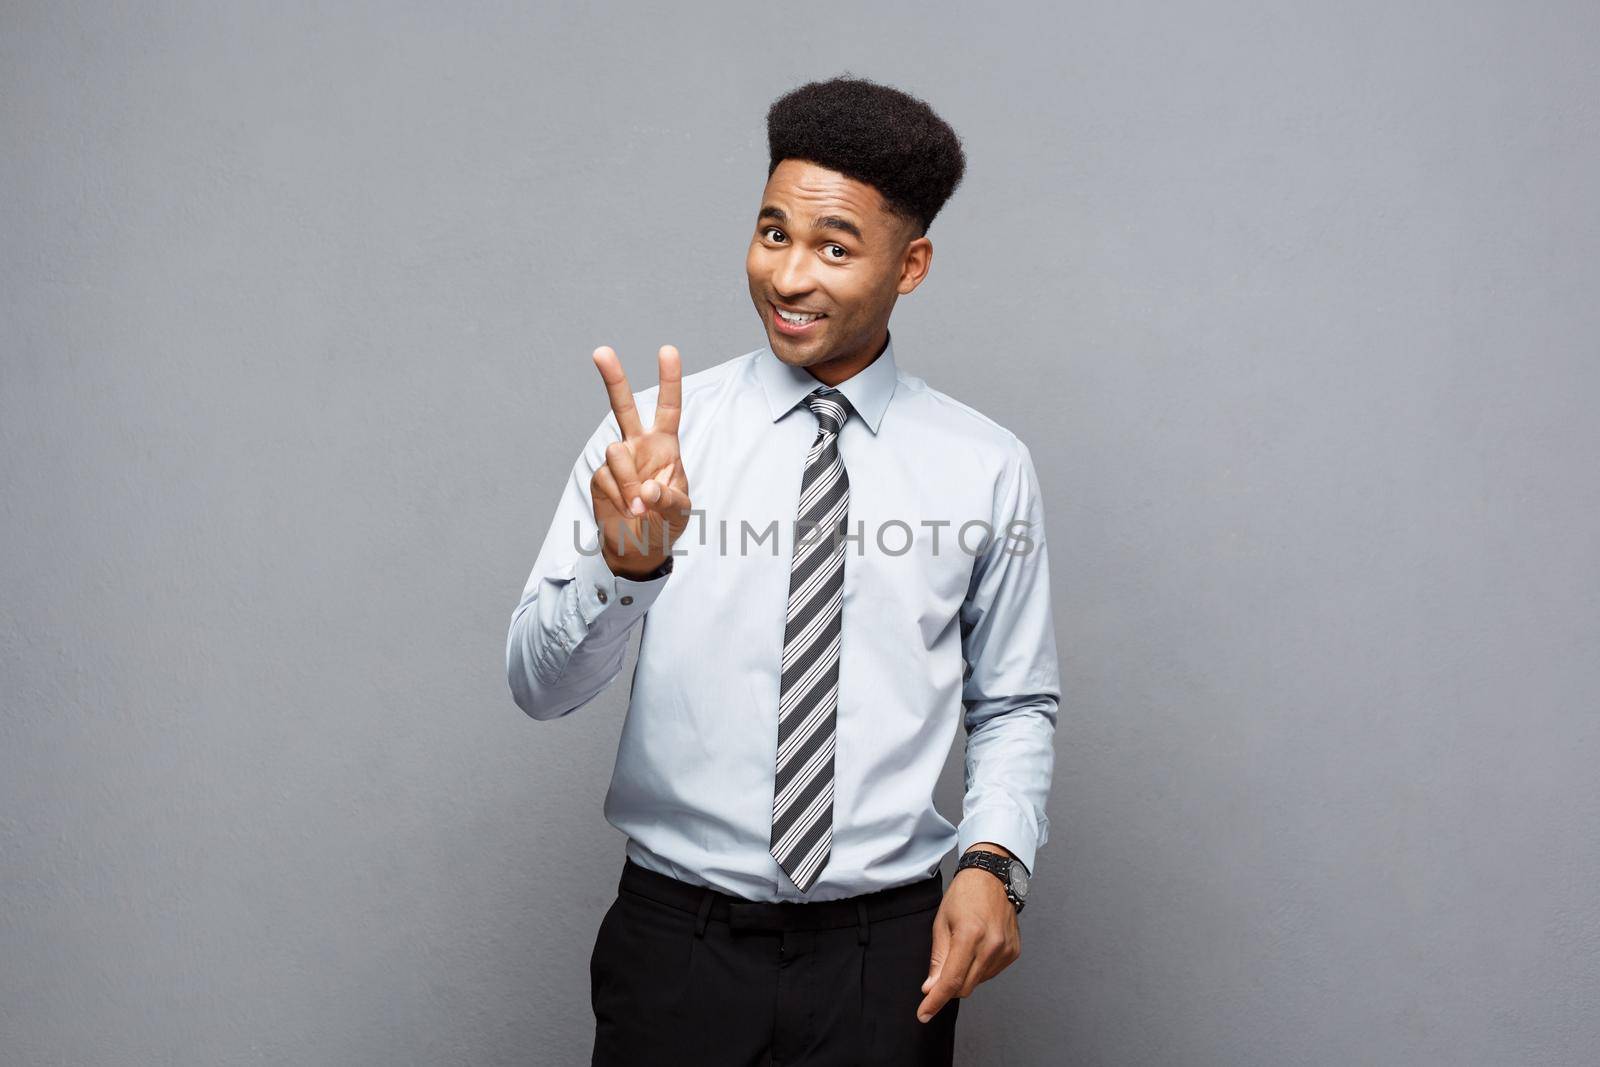 Business Concept - portrait of African American holding two peace or two fingers sign